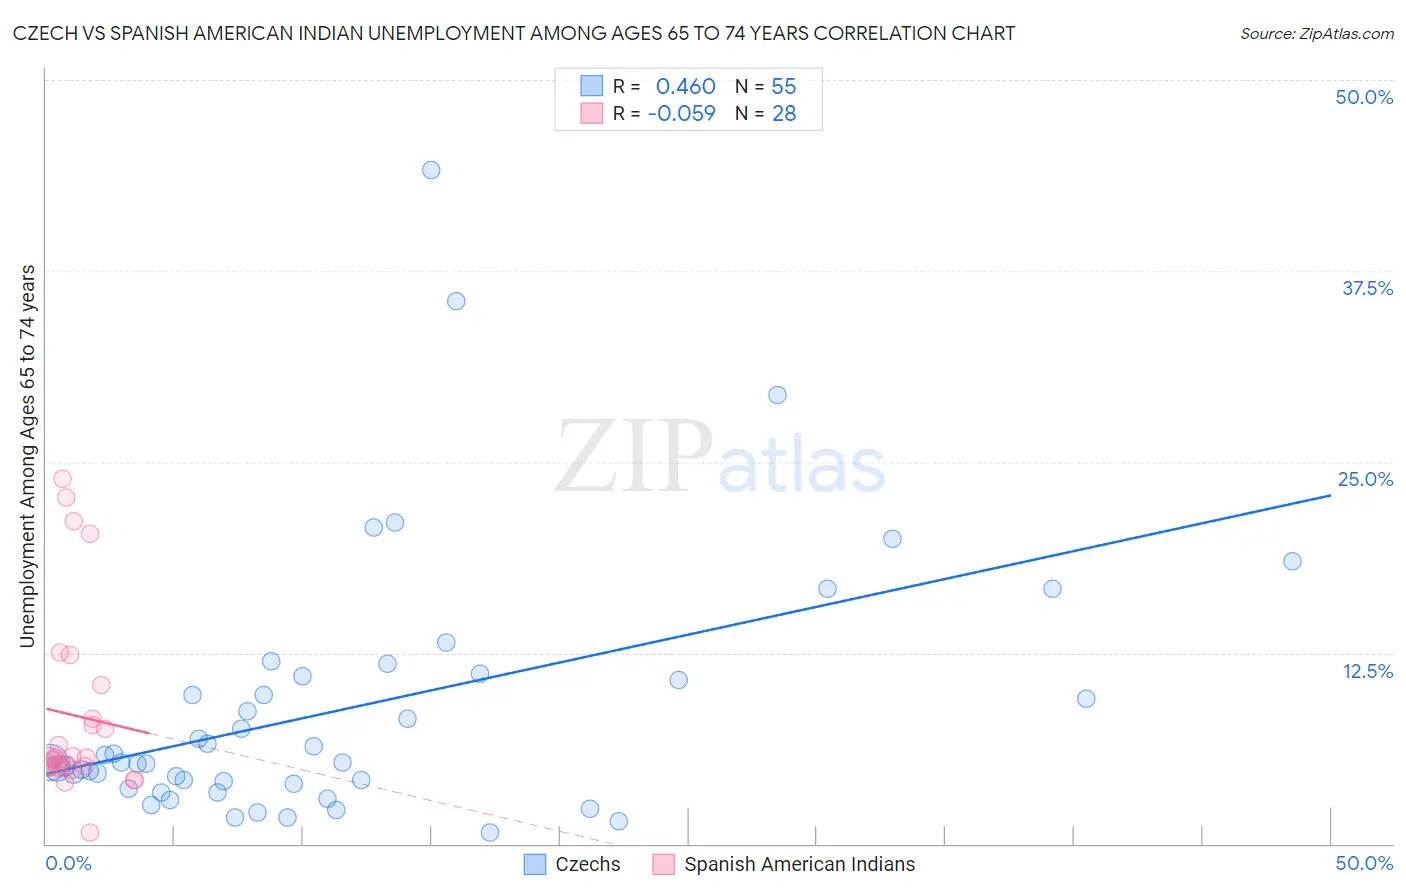 Czech vs Spanish American Indian Unemployment Among Ages 65 to 74 years